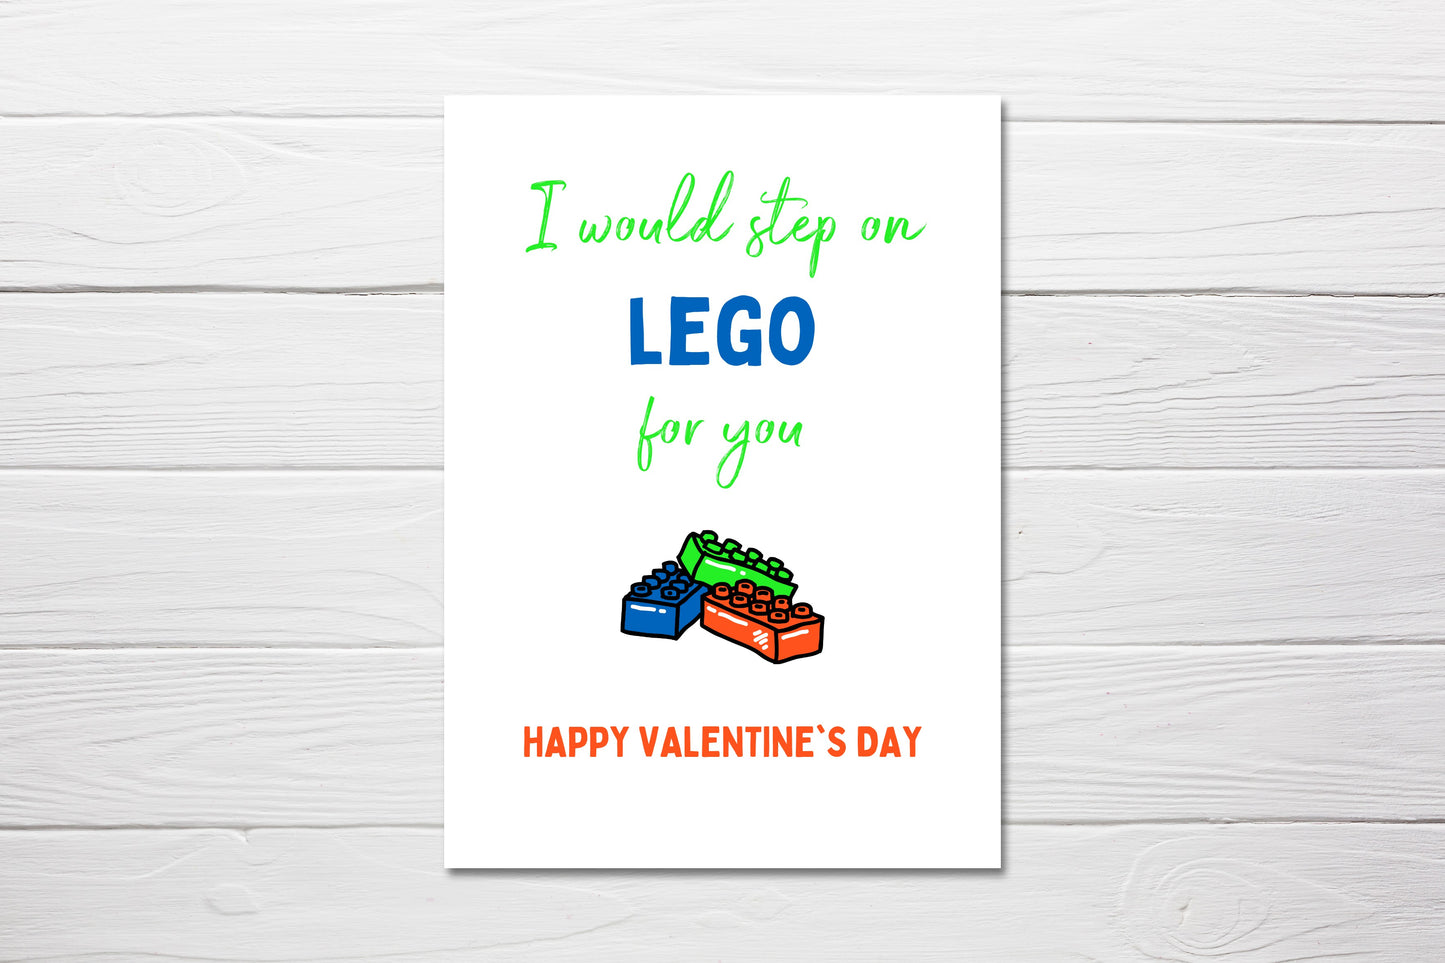 Valentines Card | I Would Step On LEGO For You | Funny Card